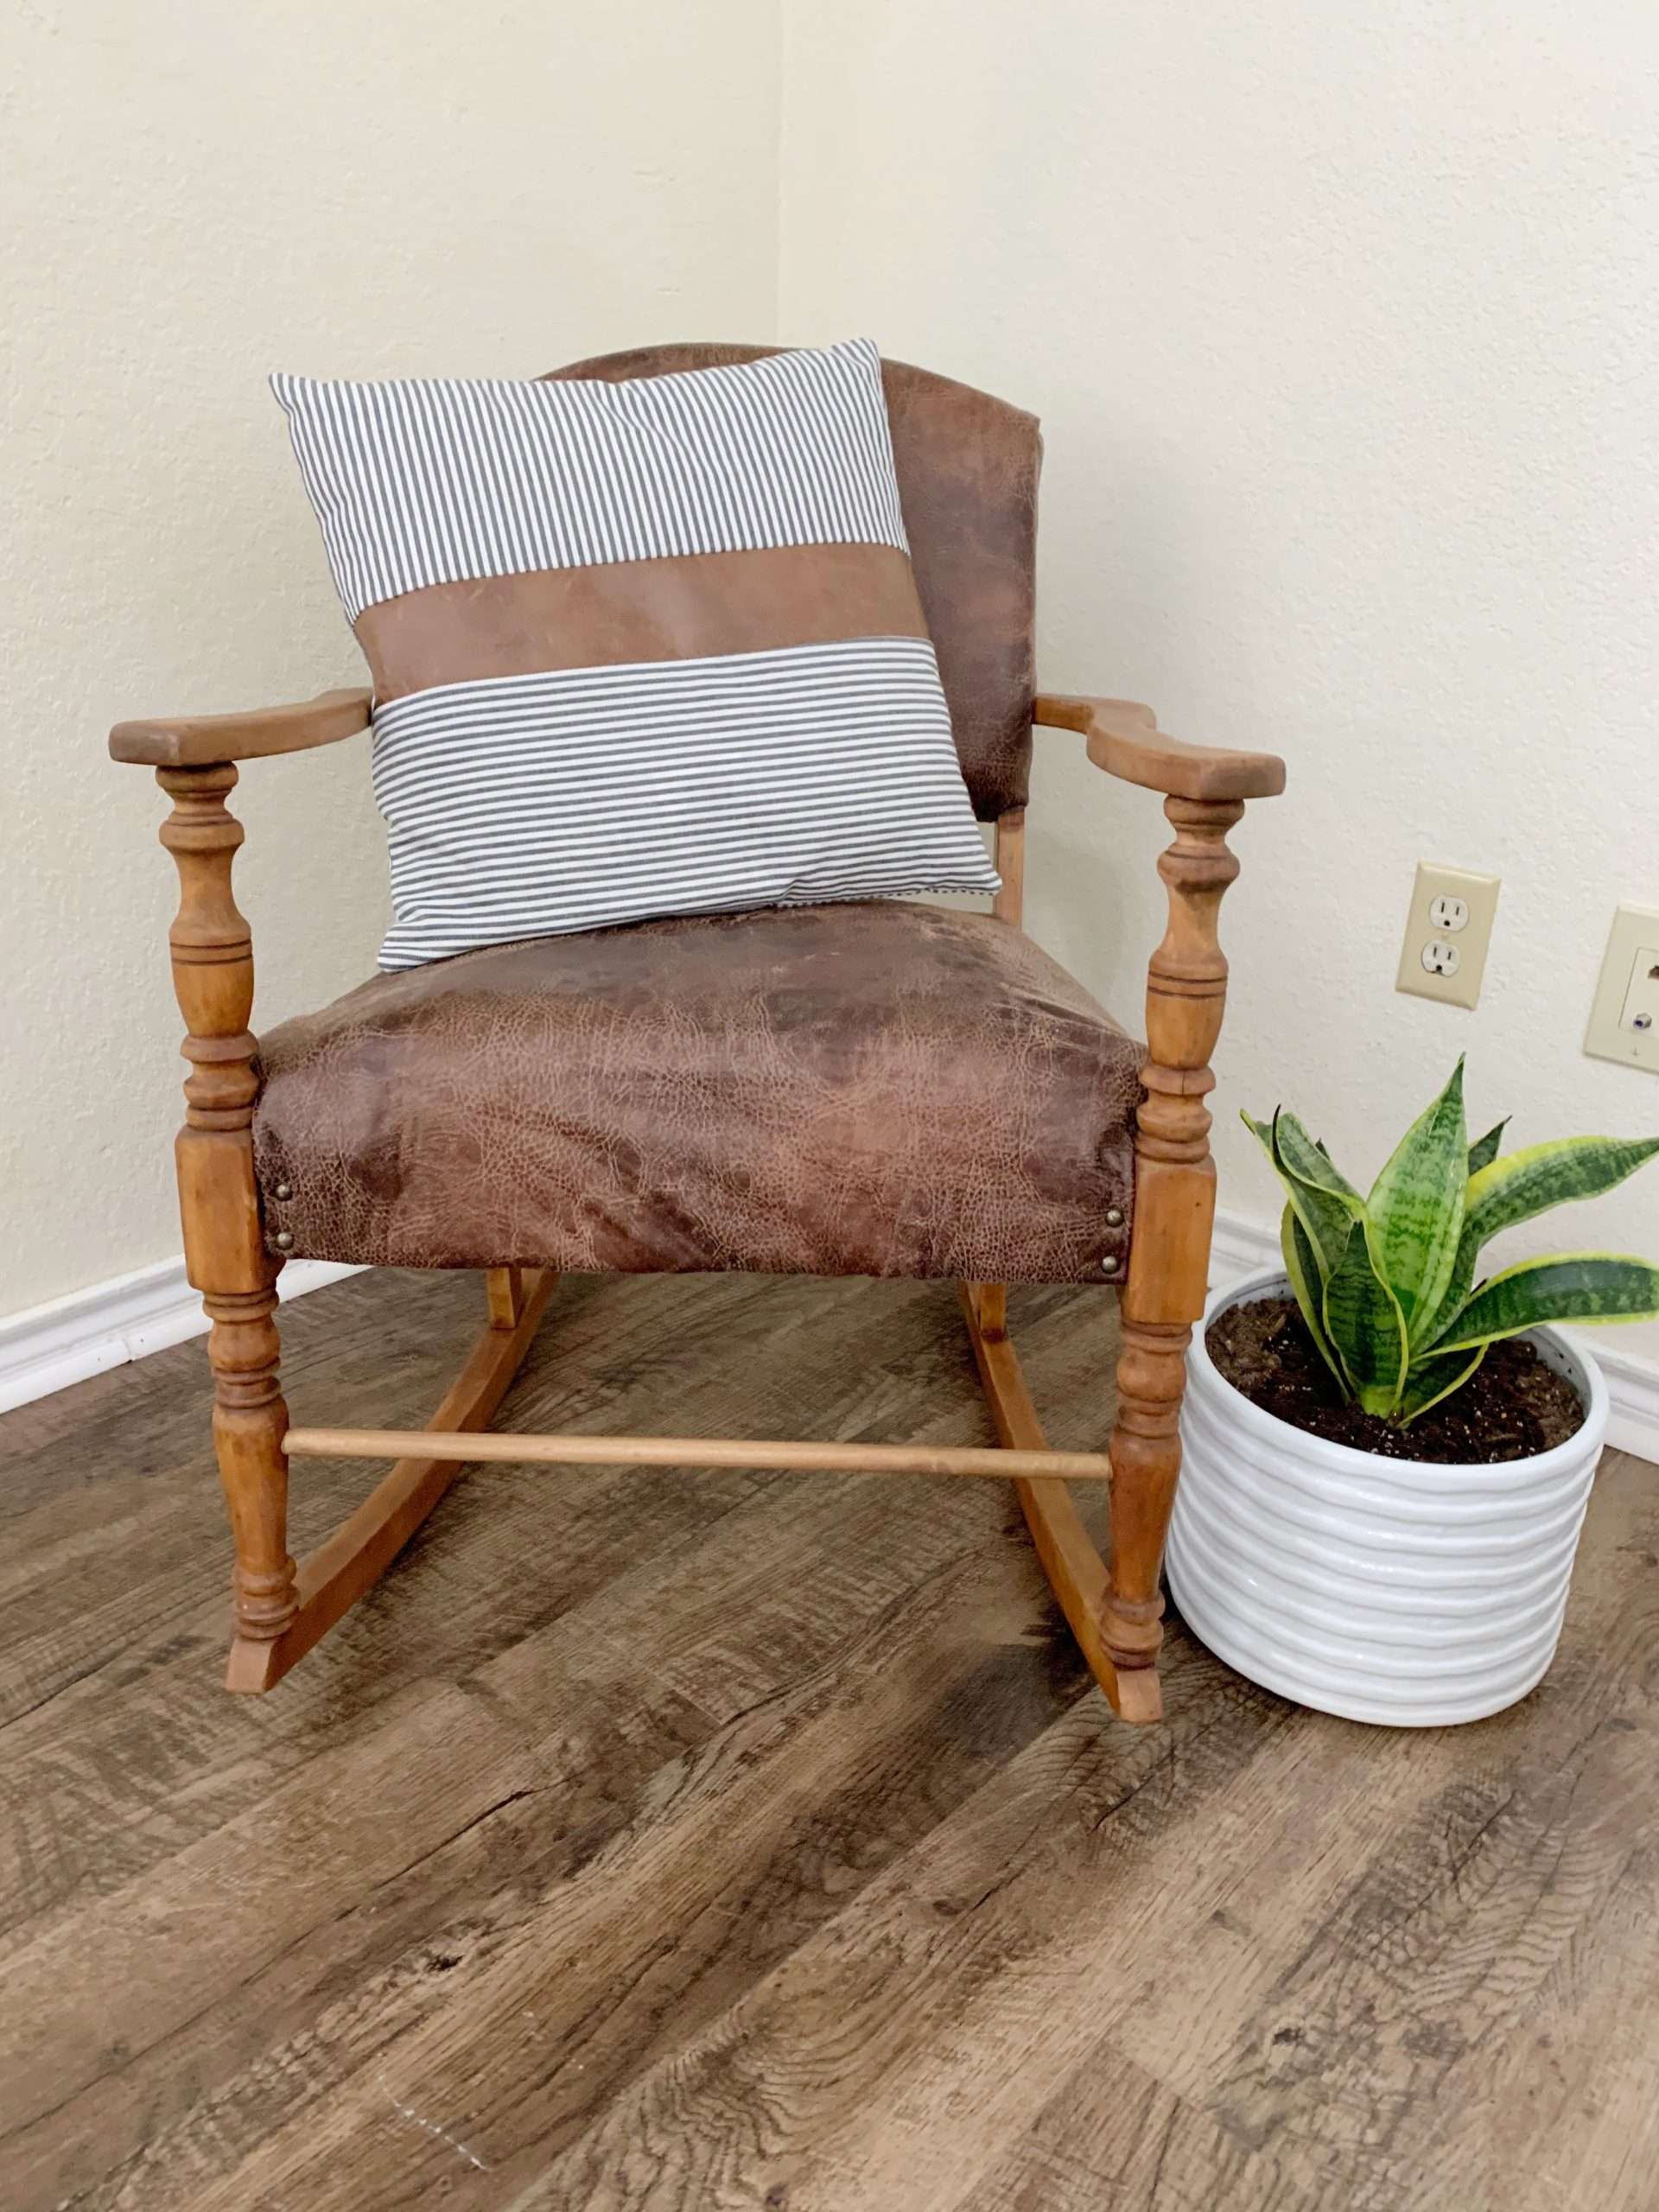 How to Refurbish An Old Rocking Chair & Family Heirloom - Finding Mandee